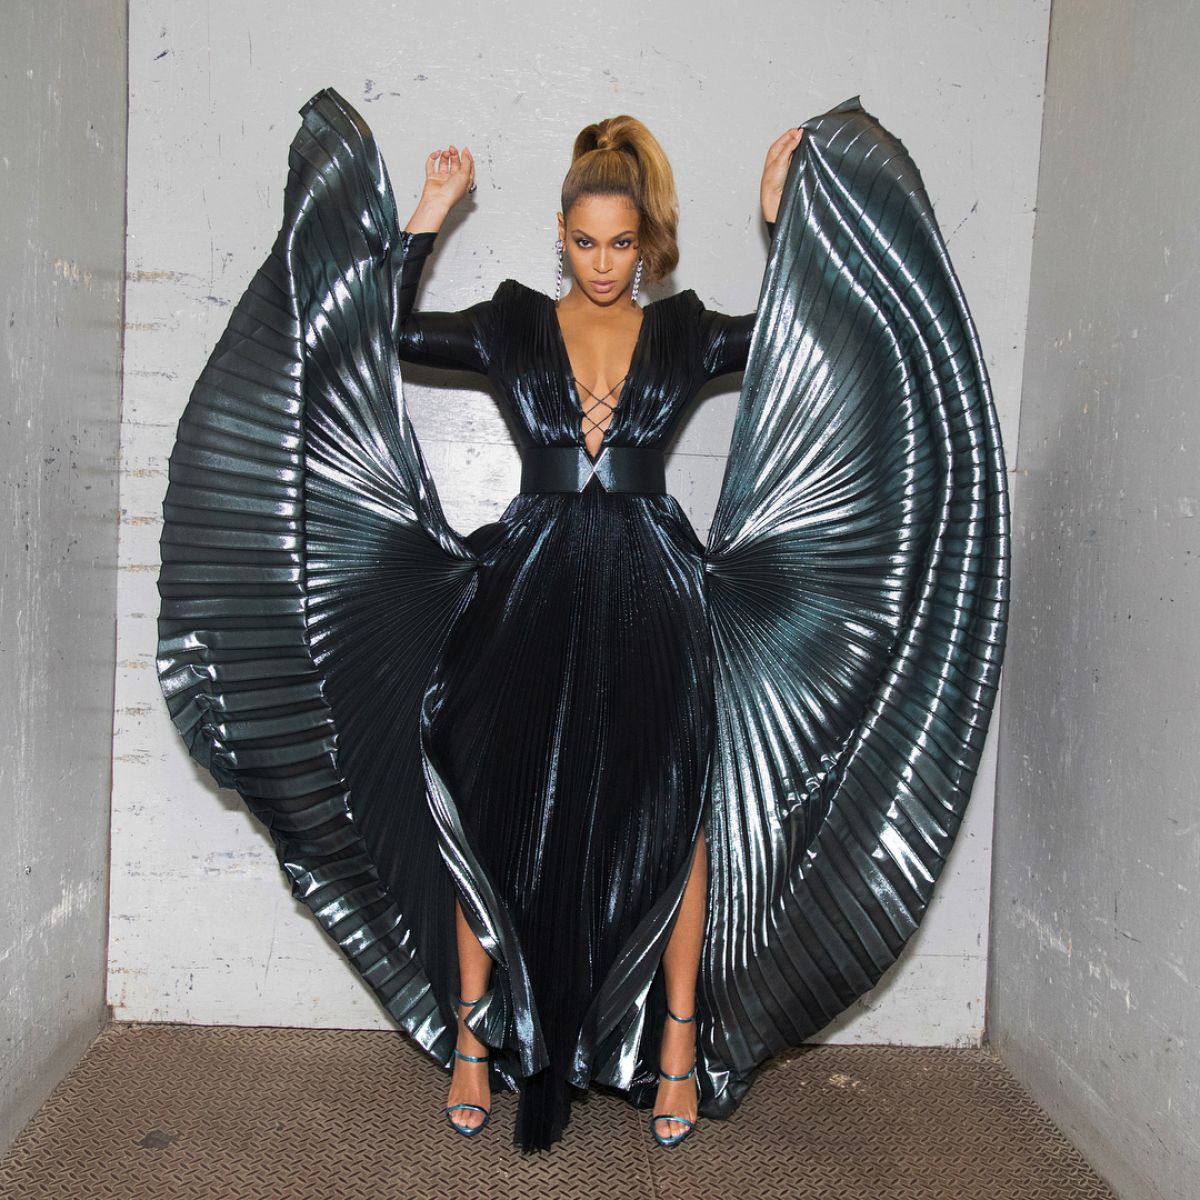 beyonce-before-attending-a-pre-grammy-party-in-new-york-01-27-2018-4.jpg